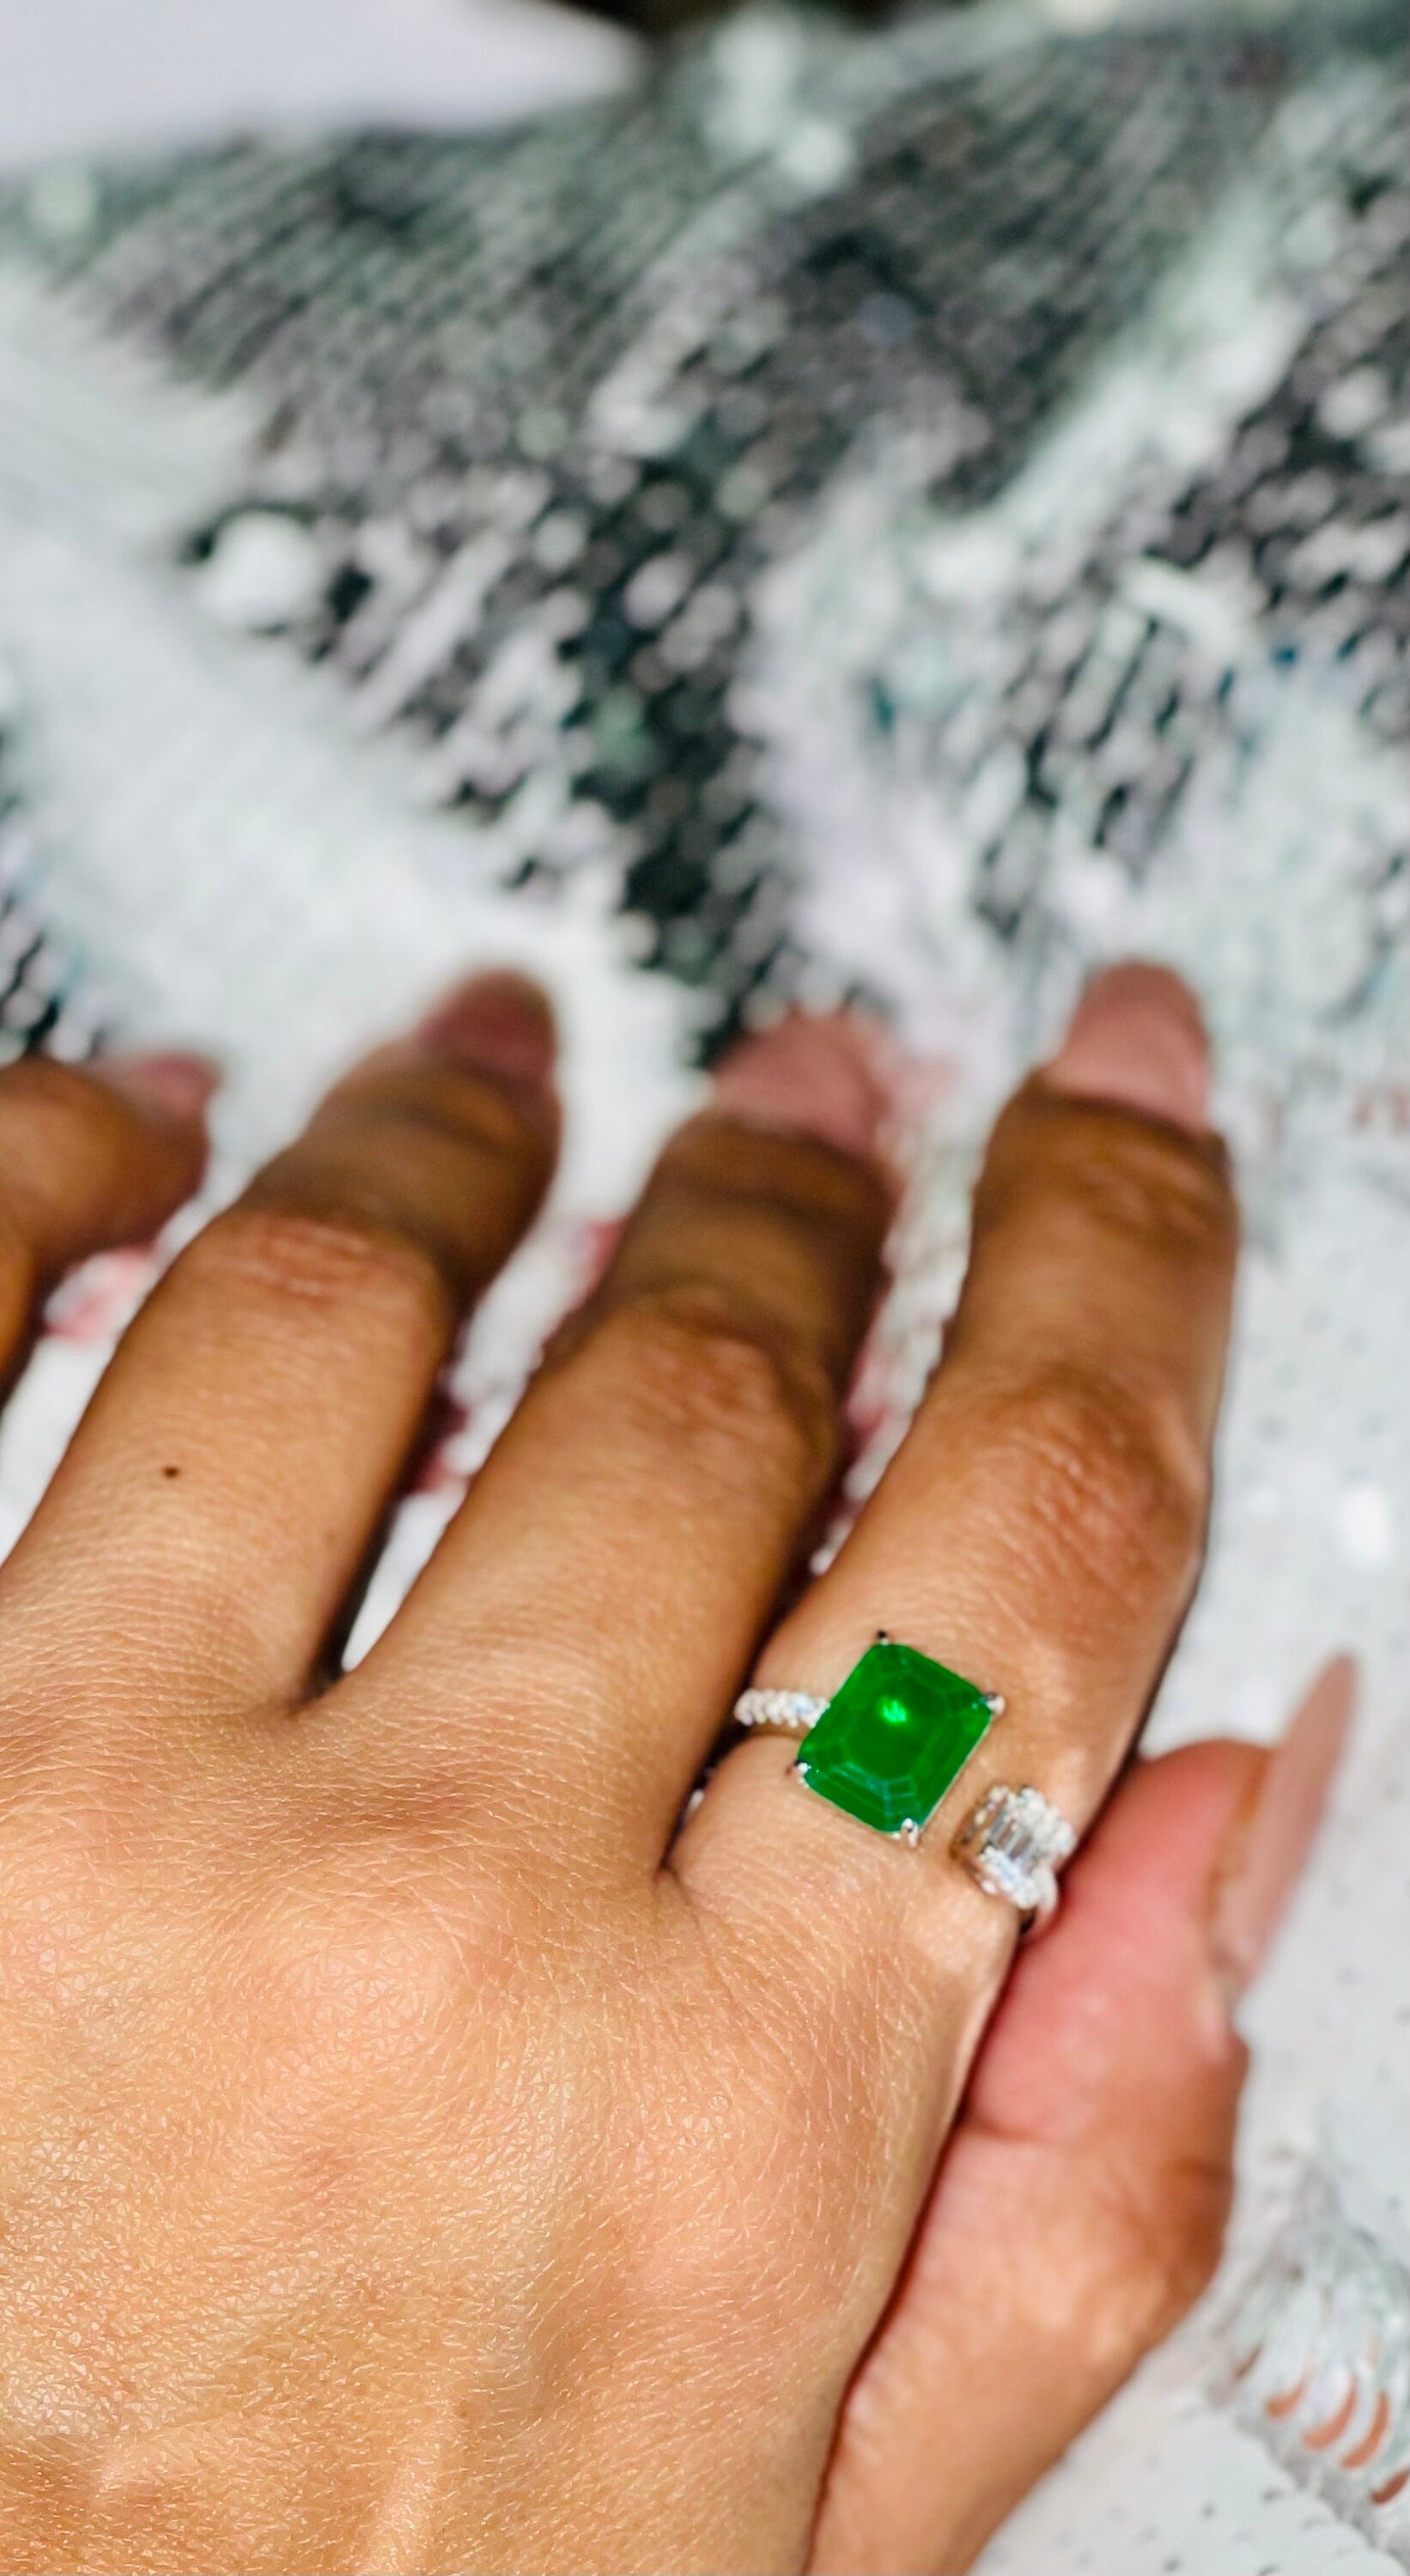 Uniquely designed Custom made emerald gemstone Crystal ring, Gifts for her, Anniversary gift, Christmas Gift, Best Affordable Gift for women